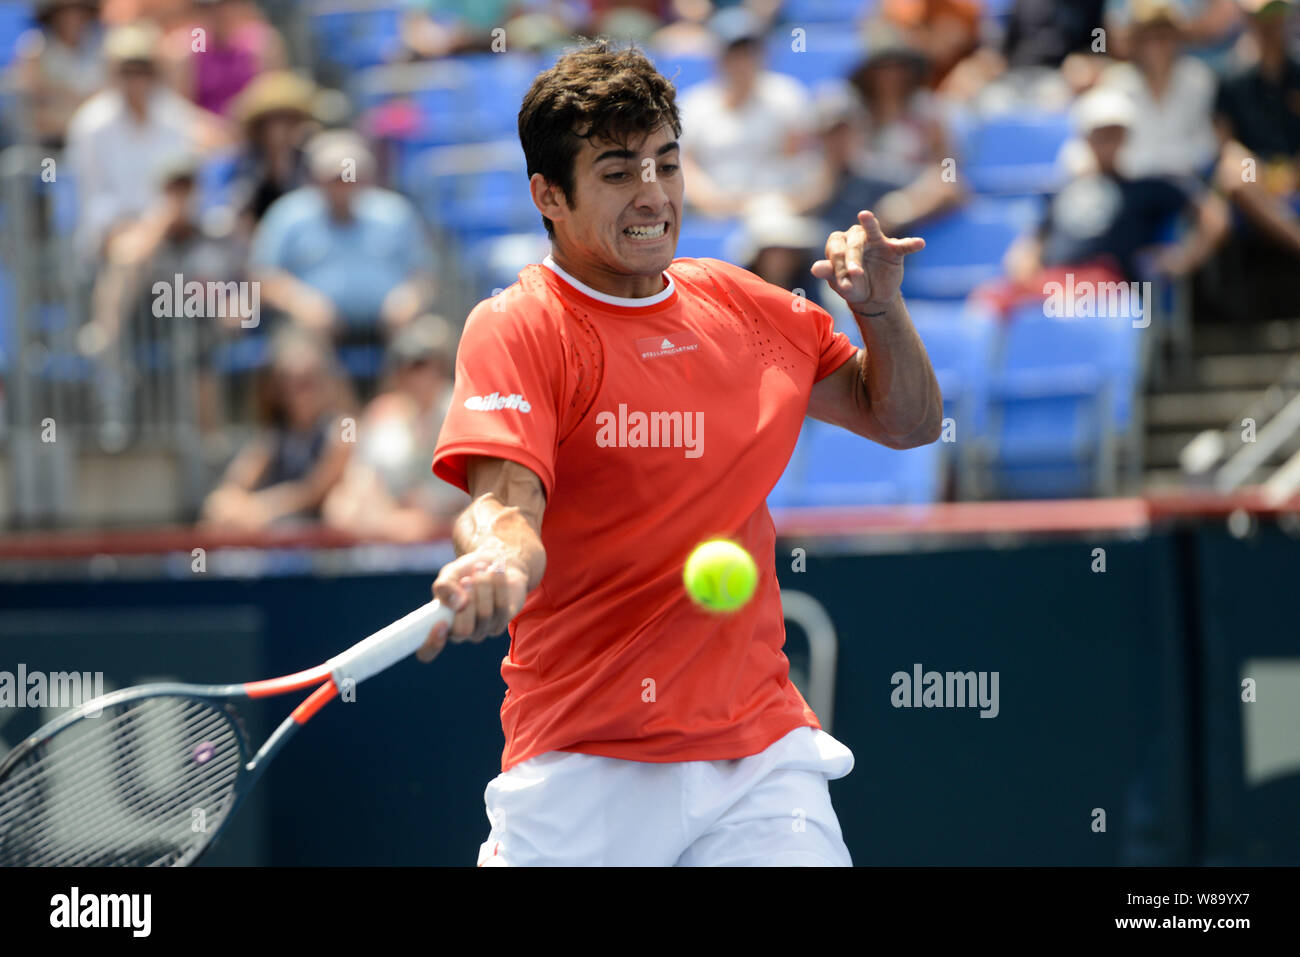 Montreal, Quebec, Canada. 8th Aug, 2019. CRISTIAN GARIN of Chile in his  third round match v. D. Medvedev in the Rogers Cup tennis tournament in  Montreal Canada. Credit: Christopher Levy/ZUMA Wire/Alamy Live